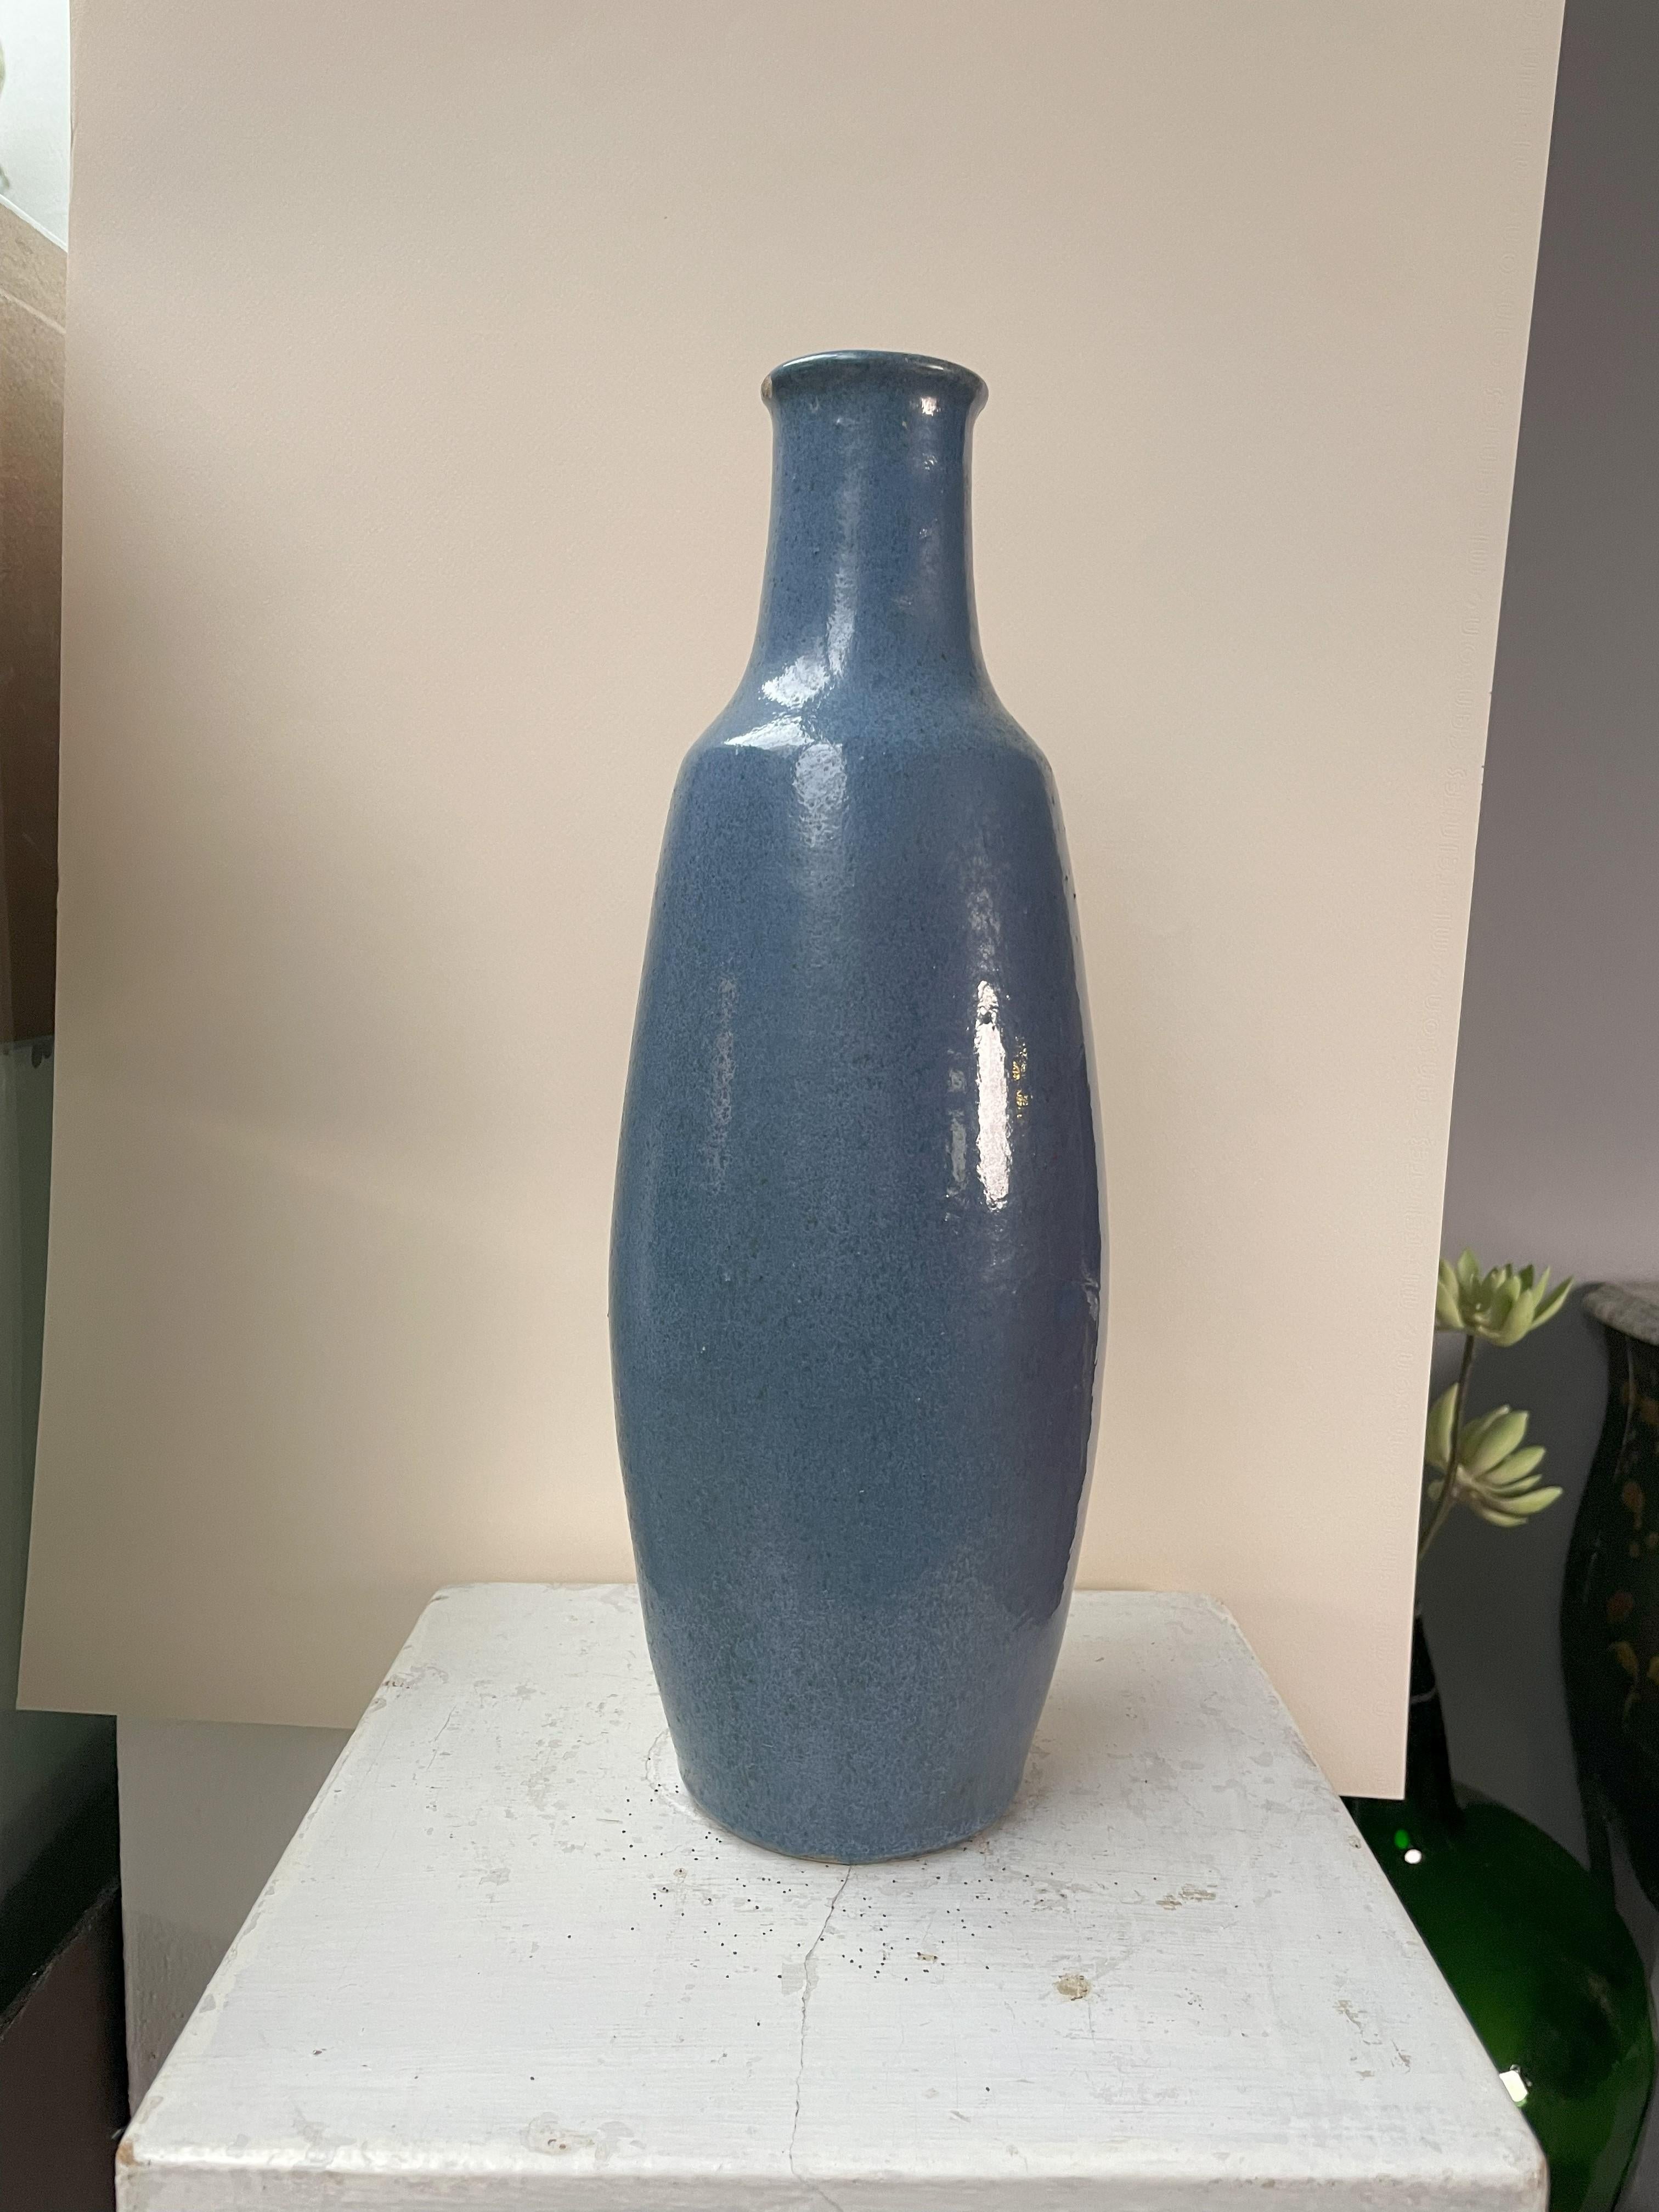 Add a touch of sophistication with our tall blue vase—a statement piece for any space.